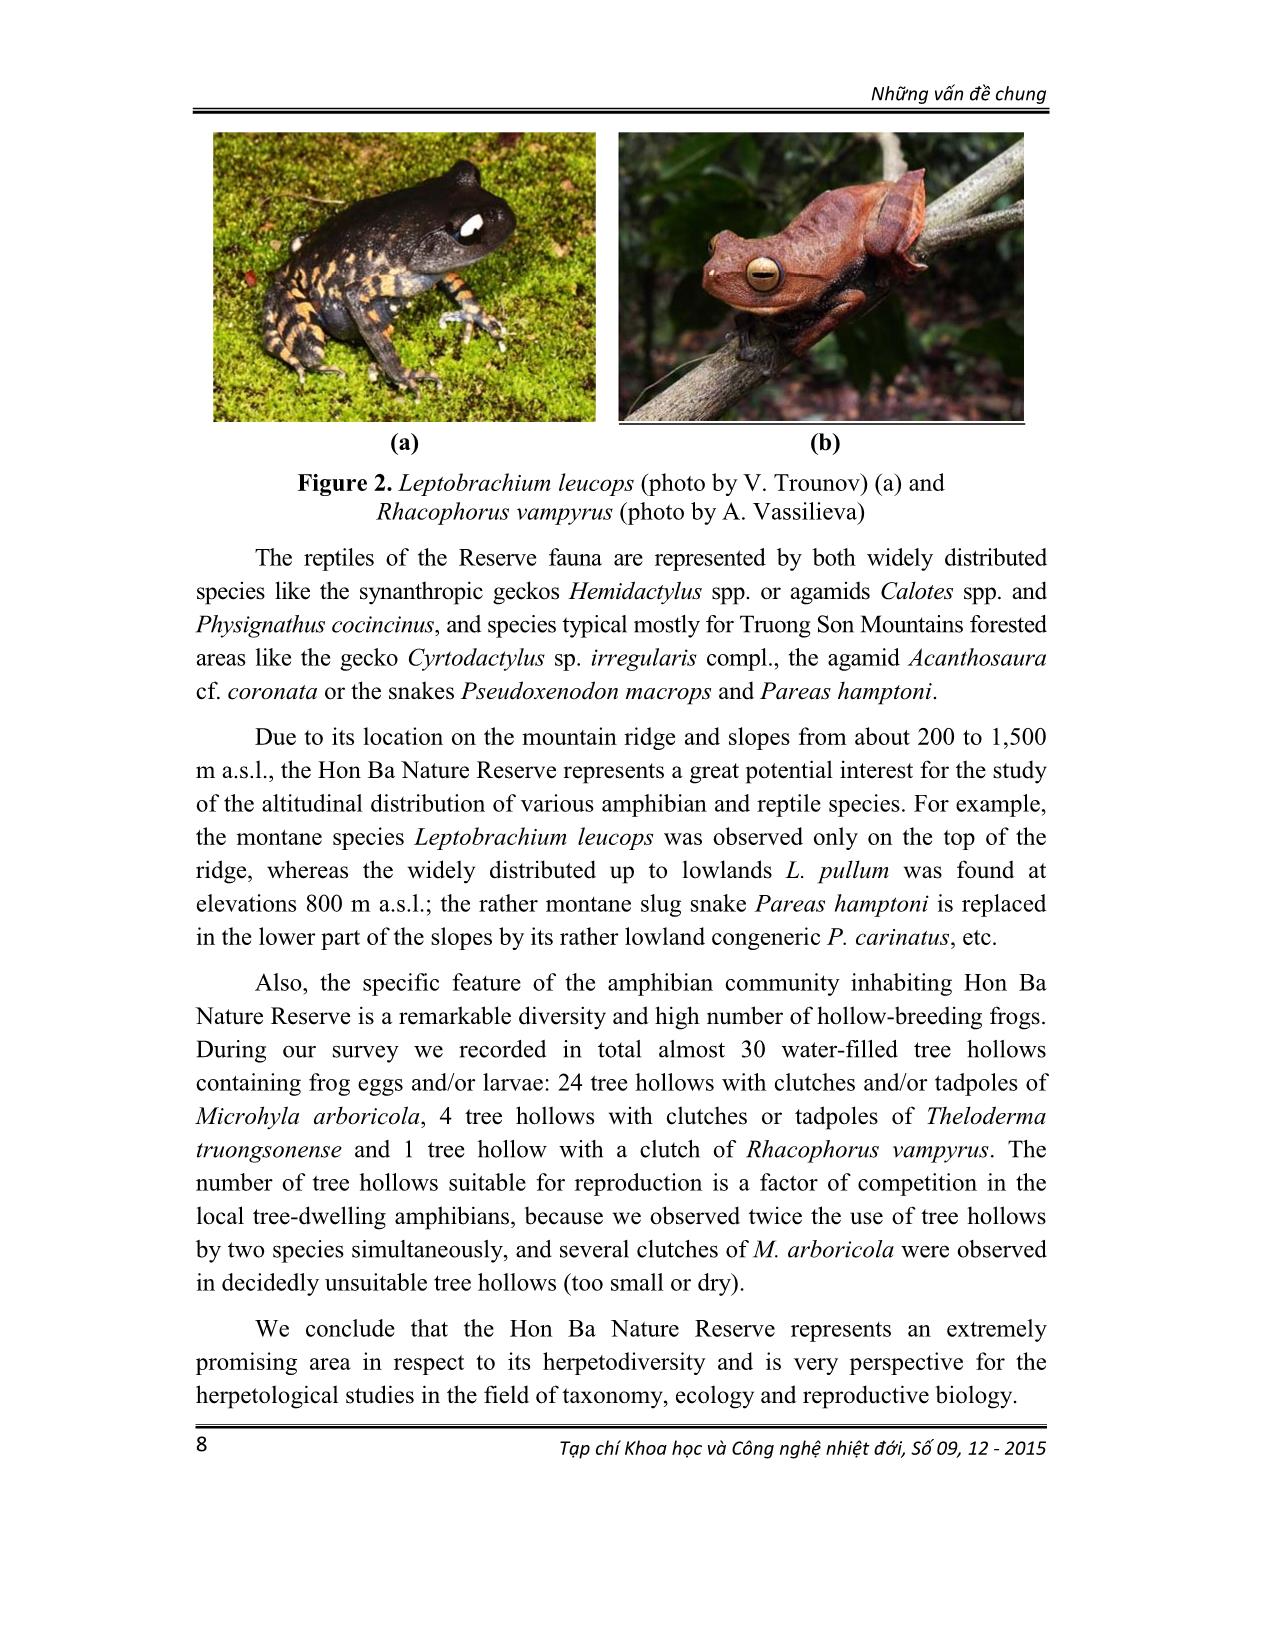 Contribution to the fauna of langbian plateau, Southern Vietnam: Amphibians and reptiles of Hon Ba nature reserve (Khanh Hoa province) trang 6